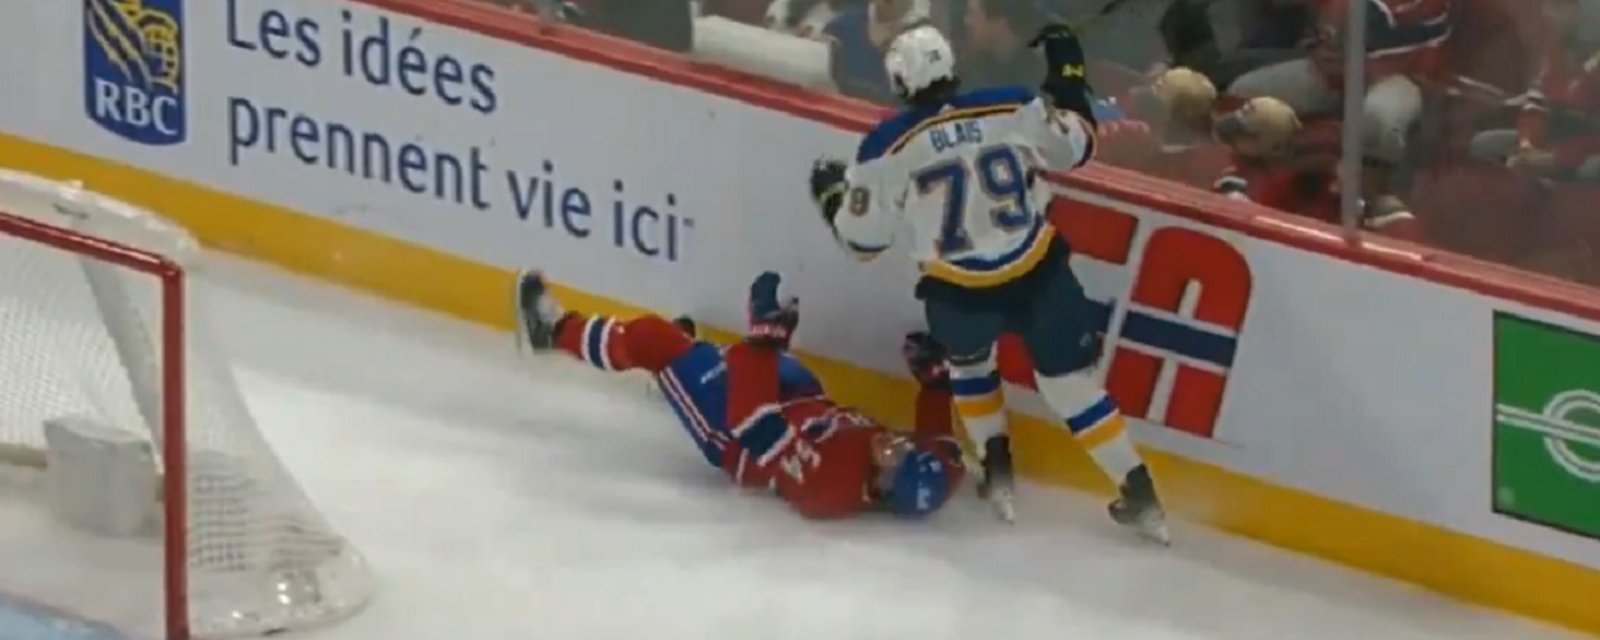 Harris hurt bad after Blais nearly takes his head off.